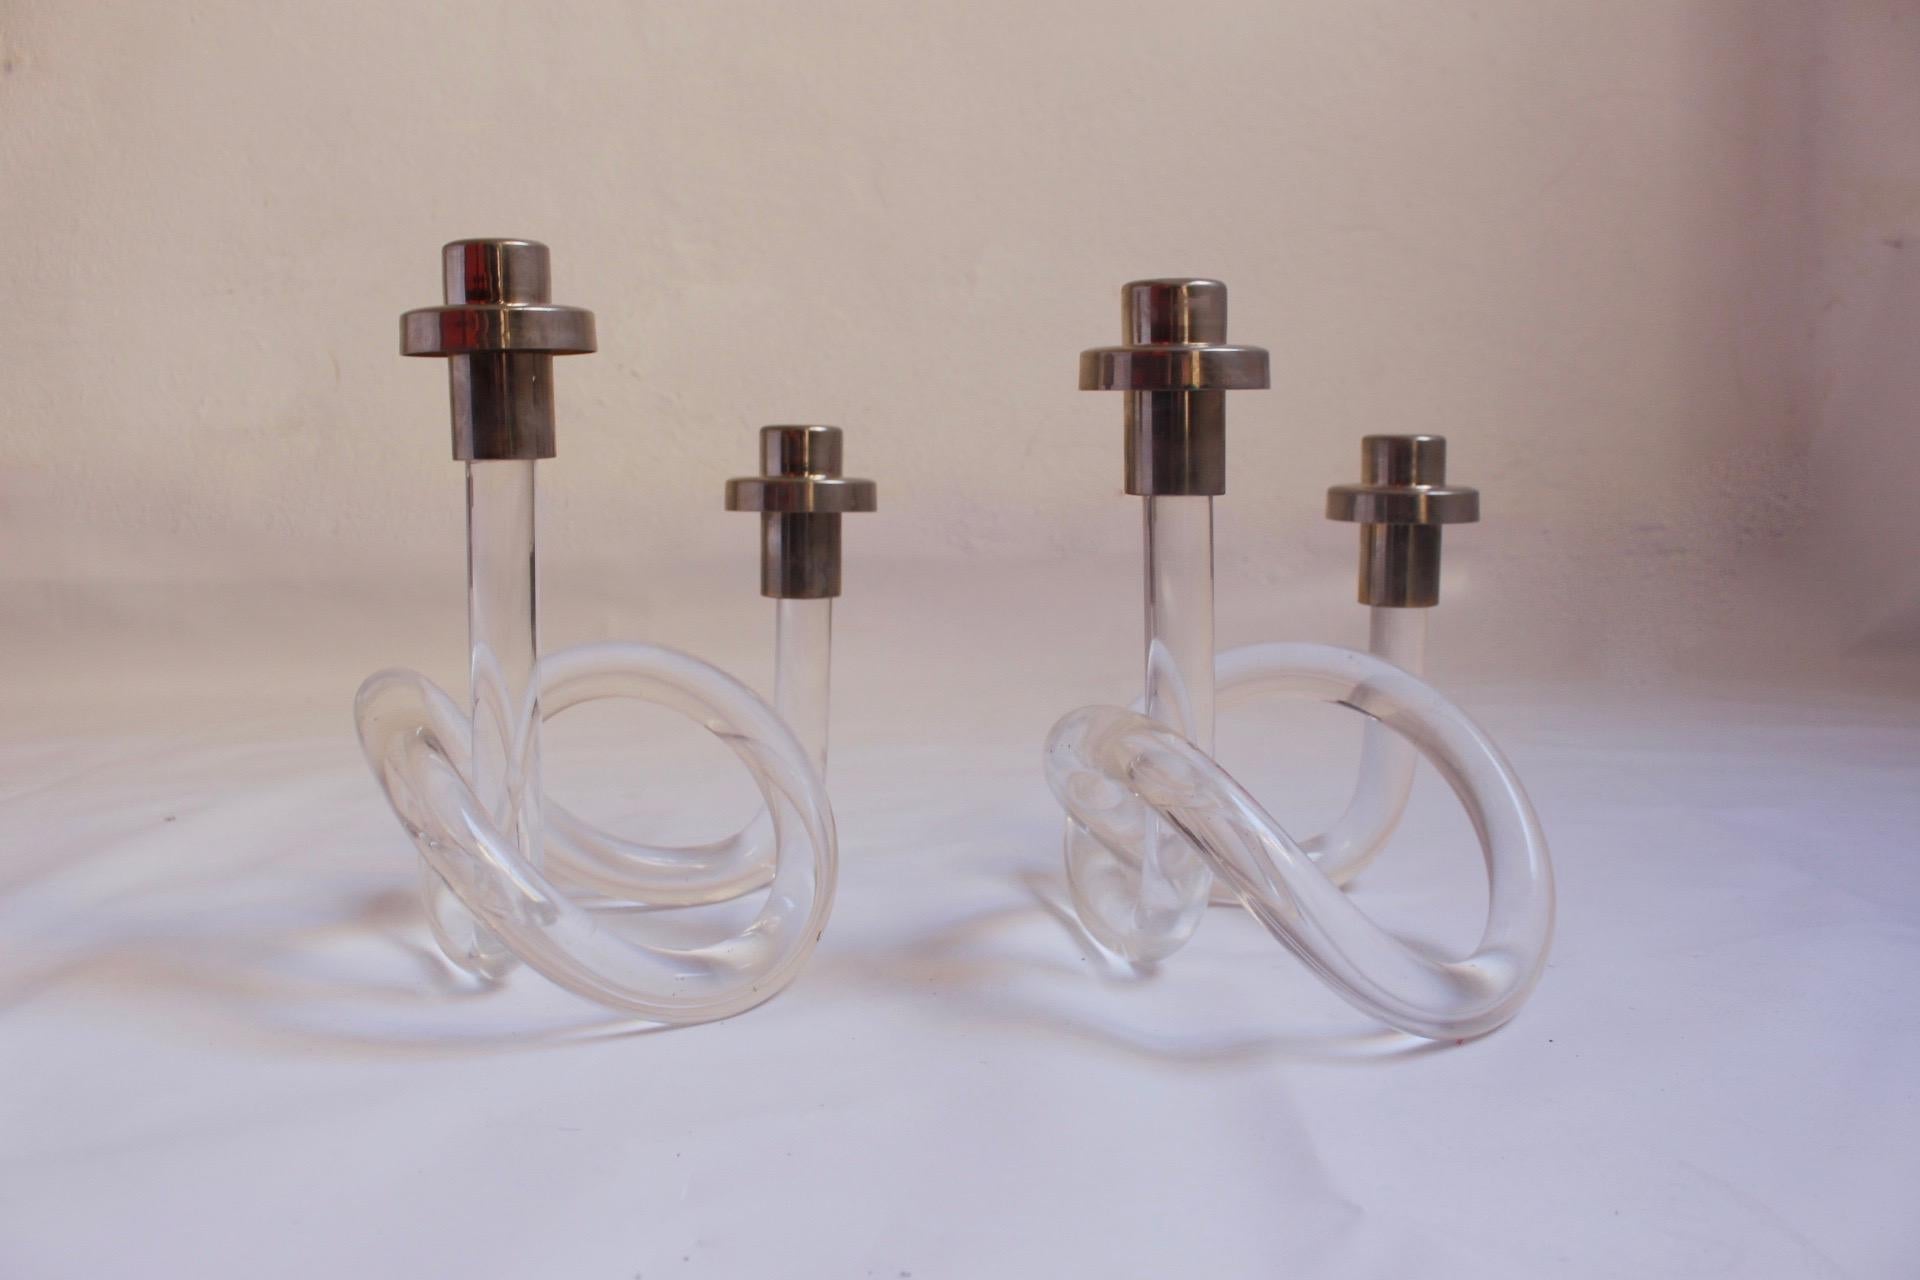 Set of 2 Lucite and chrome double candlestick holder designed by American designer Dorothy Thorpe, circa 1960s.
 Single piece bent and twisted acrylic to form the base which is often referred to as the Pretzel.
 